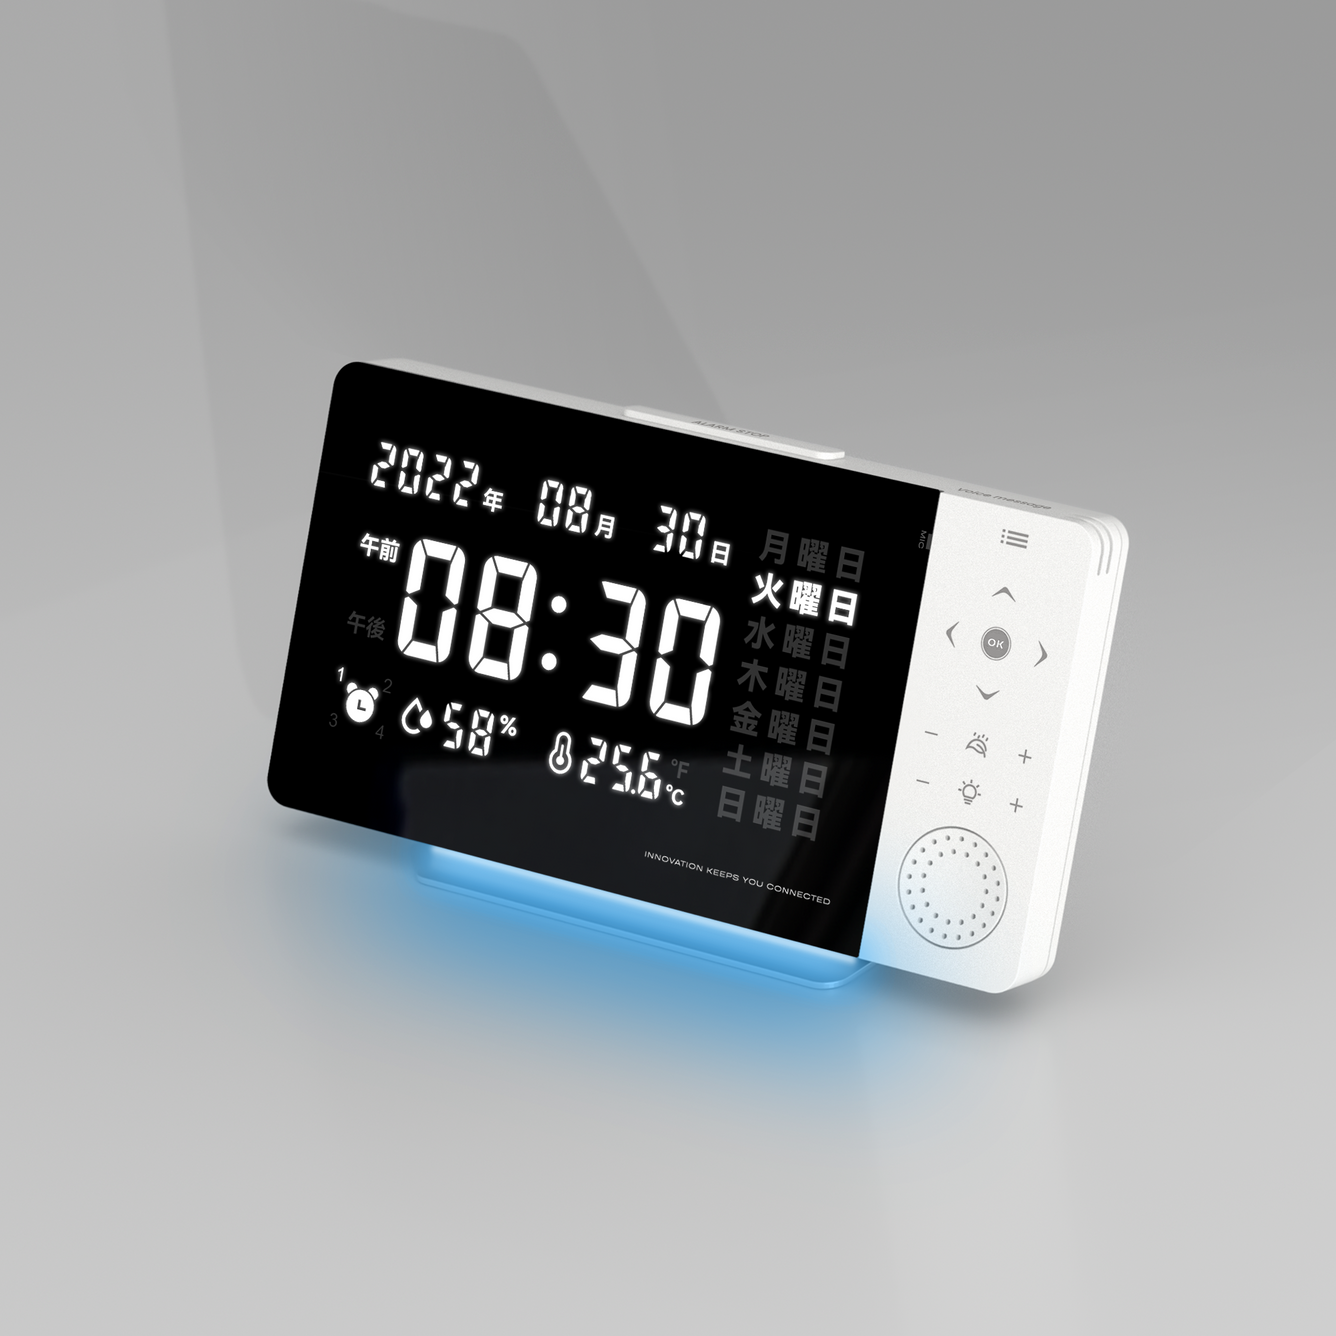 SMARTCUCKOO Smart Alarm Clock - 8-inch Large Display clear Day of the Week reading Night Light White Noise Temperature-humidity Sensor Personal Voice Medication Reminder. iOS/Android App, remote and  Bluetooth connection!